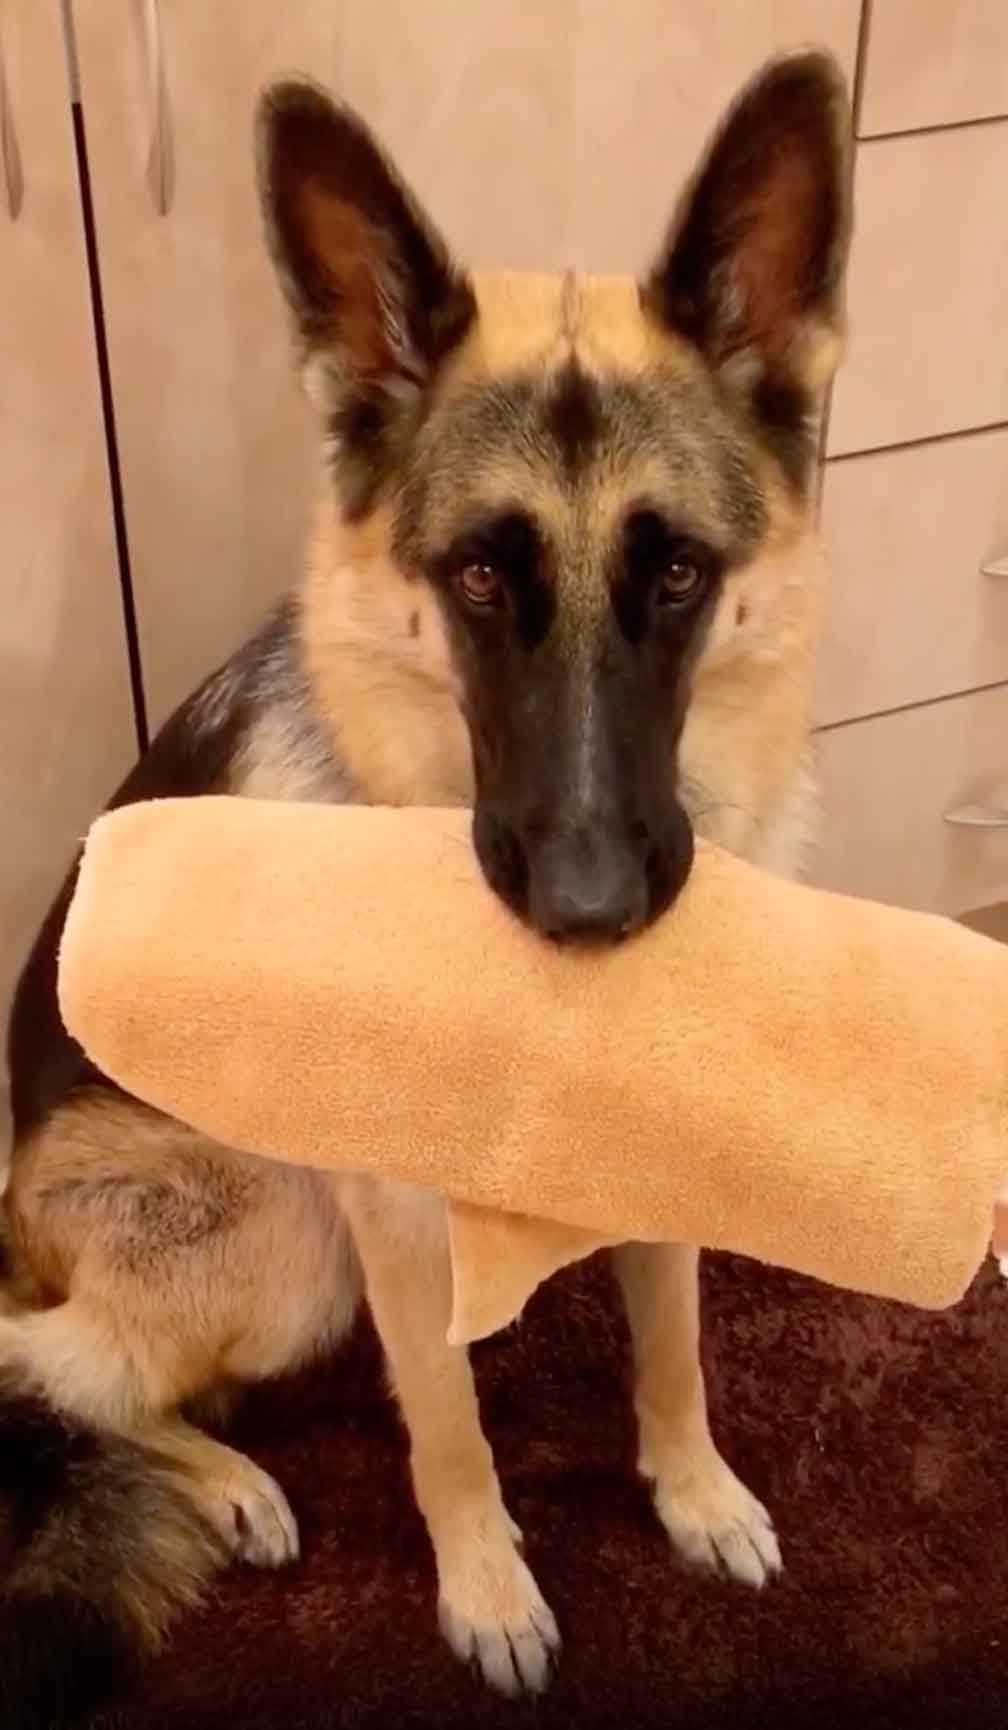 Need a Laugh? These Are the 12 Best Funny Dog Videos of 2020 | BeChewy